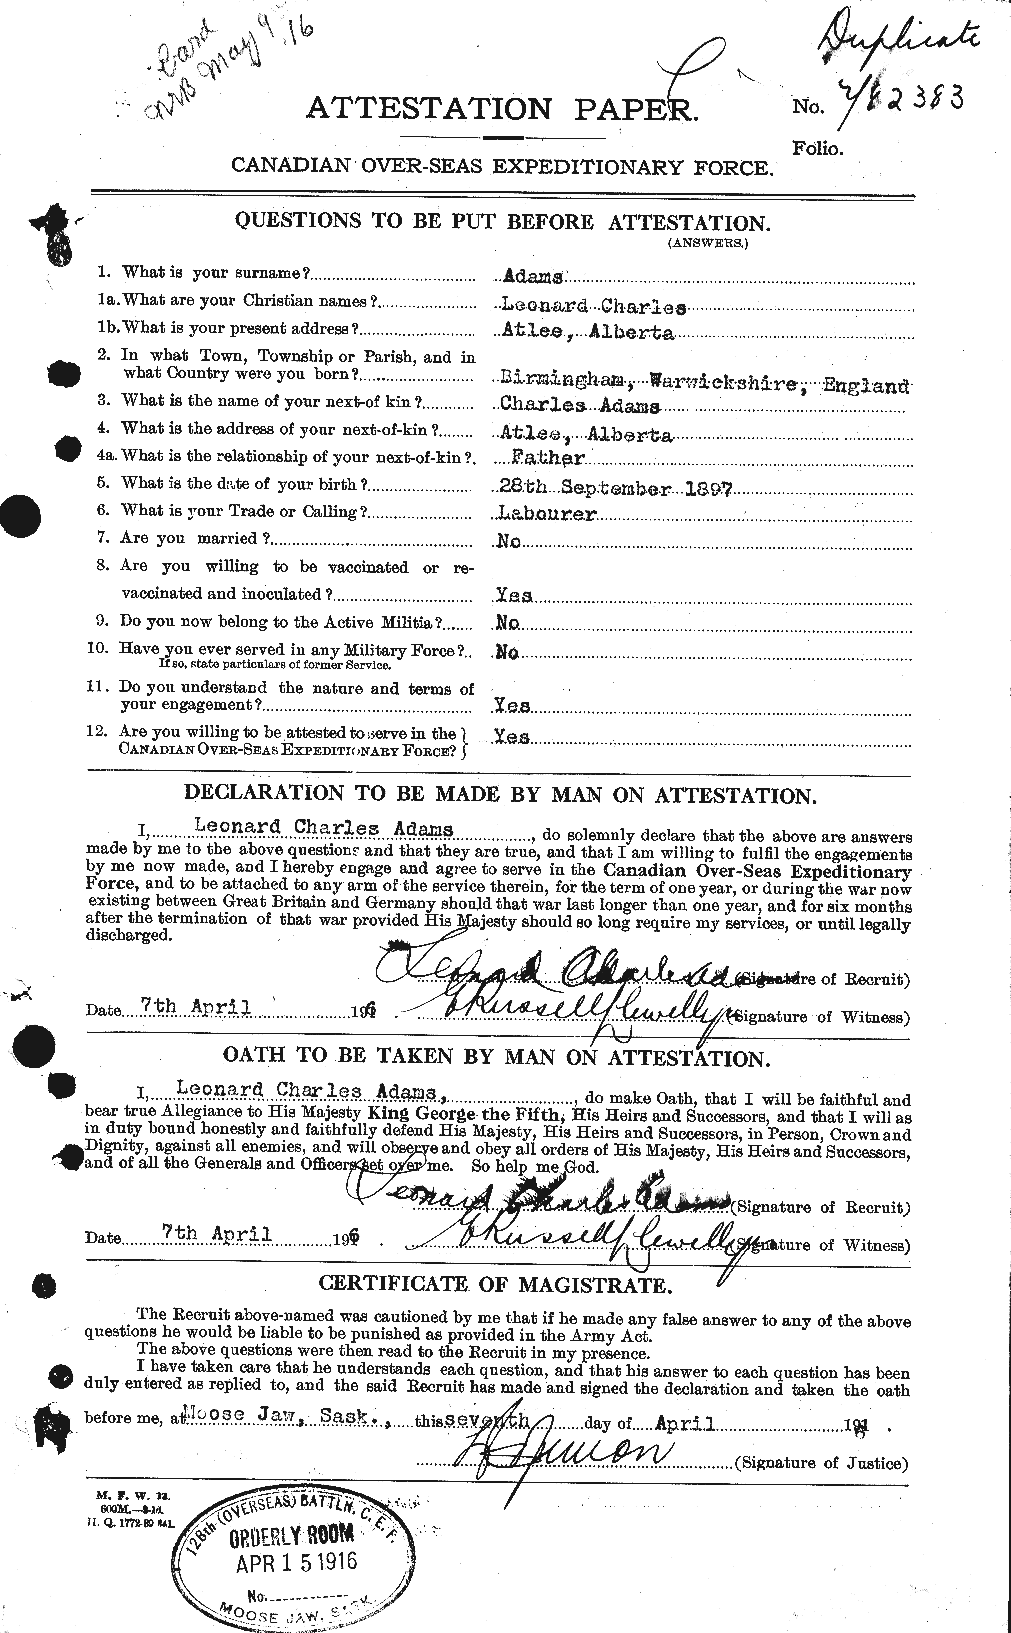 Personnel Records of the First World War - CEF 201961a